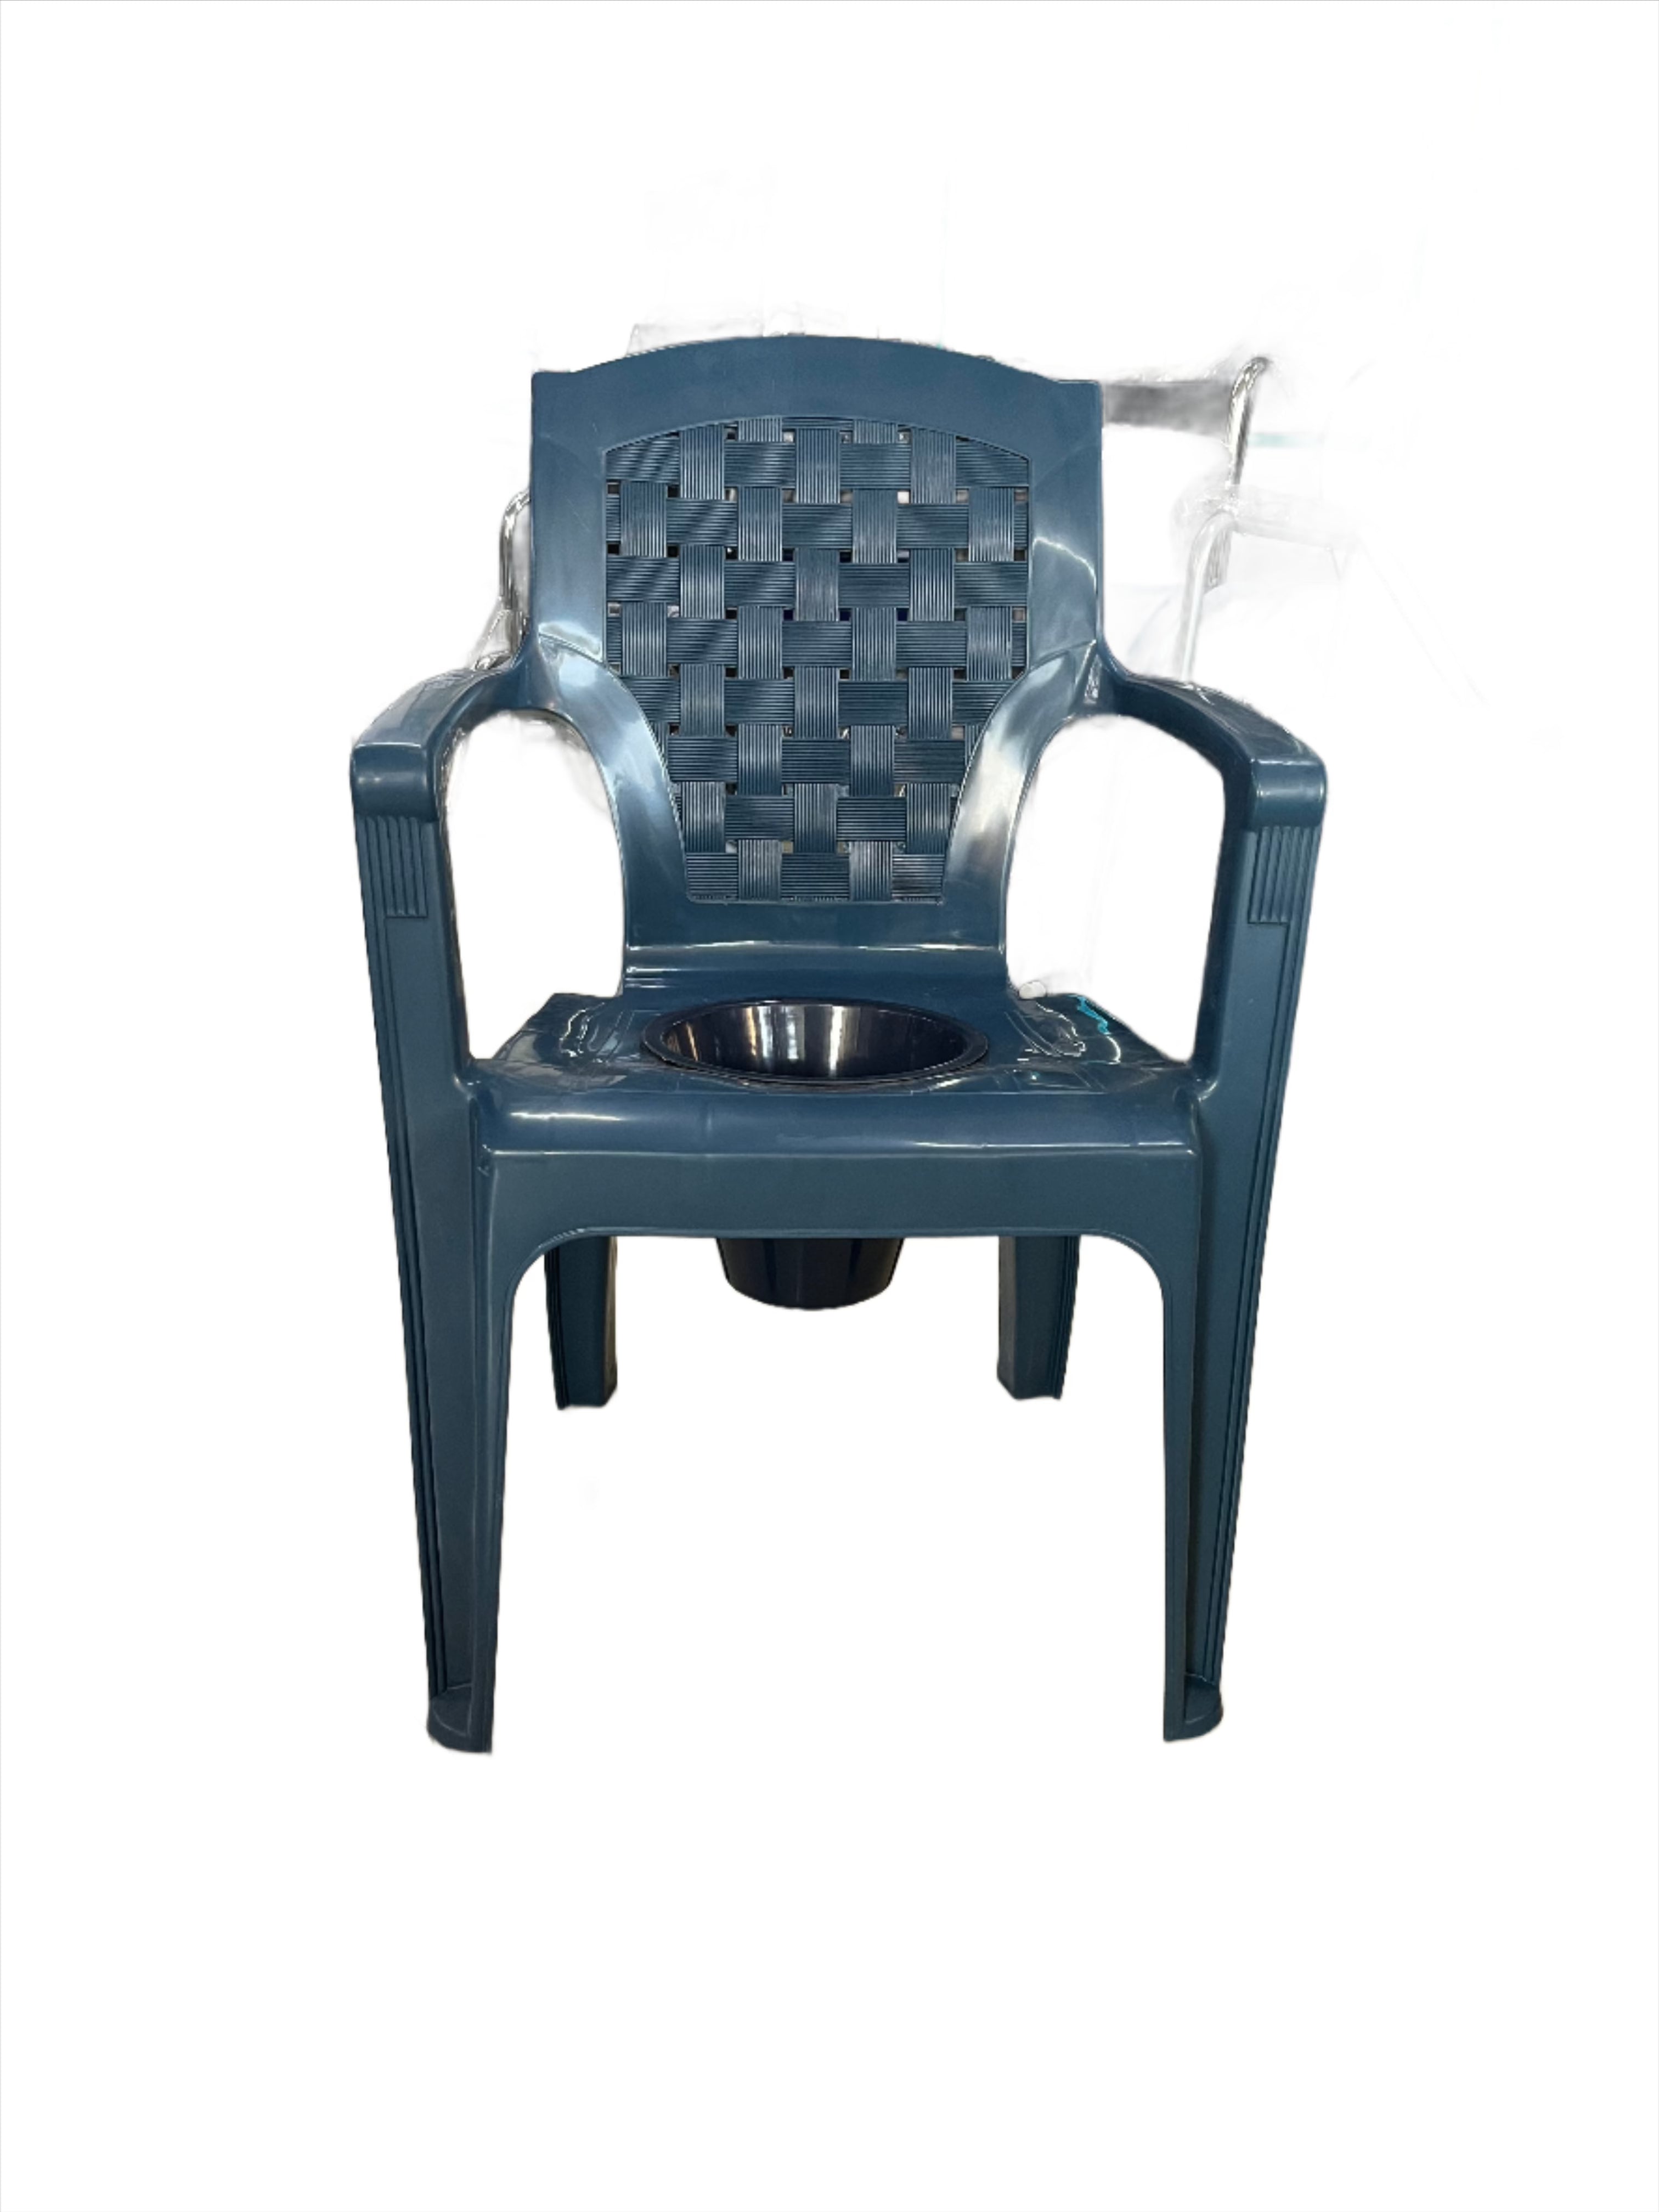 PVC toilet Chair for adults at best price in Chennai